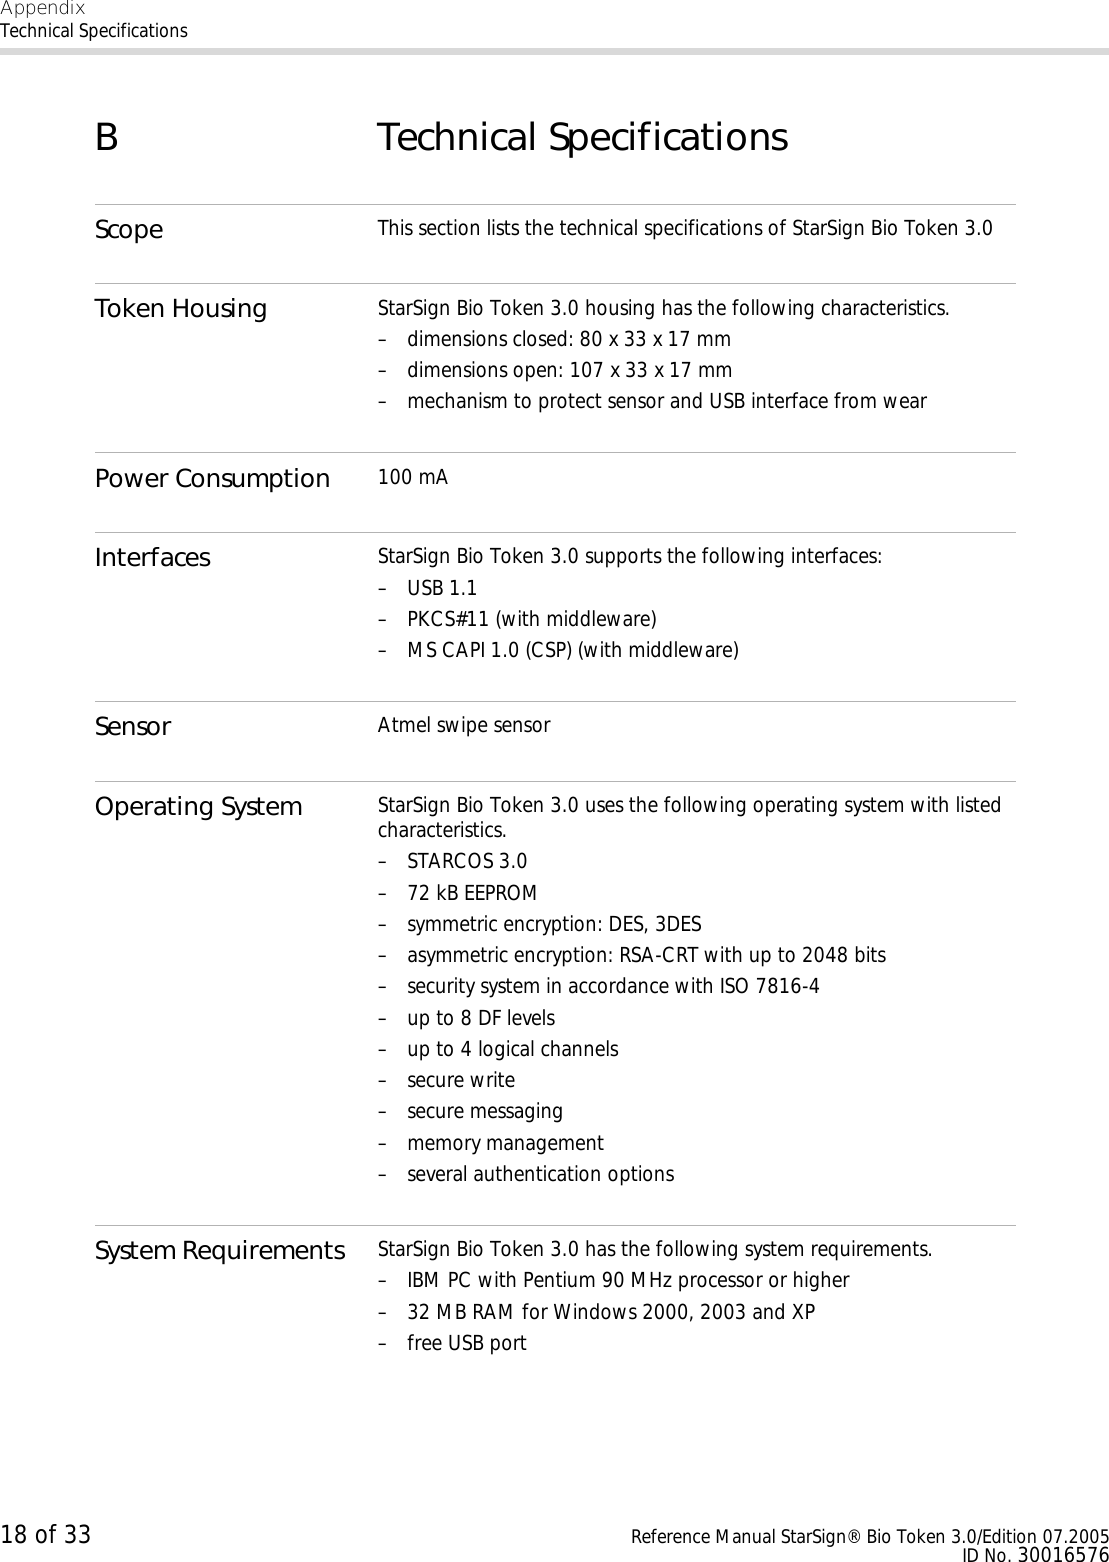 AppendixTechnical Specifications18 of 33 Reference Manual StarSign® Bio Token 3.0/Edition 07.2005ID No. 30016576B Technical SpecificationsScope This section lists the technical specifications of StarSign Bio Token 3.0Token Housing StarSign Bio Token 3.0 housing has the following characteristics.– dimensions closed: 80 x 33 x 17 mm– dimensions open: 107 x 33 x 17 mm– mechanism to protect sensor and USB interface from wearPower Consumption 100 mAInterfaces StarSign Bio Token 3.0 supports the following interfaces:– USB 1.1– PKCS#11 (with middleware)– MS CAPI 1.0 (CSP) (with middleware)Sensor Atmel swipe sensorOperating System StarSign Bio Token 3.0 uses the following operating system with listed characteristics.– STARCOS 3.0– 72 kB EEPROM– symmetric encryption: DES, 3DES– asymmetric encryption: RSA-CRT with up to 2048 bits– security system in accordance with ISO 7816-4– up to 8 DF levels– up to 4 logical channels– secure write– secure messaging– memory management– several authentication optionsSystem Requirements StarSign Bio Token 3.0 has the following system requirements.– IBM PC with Pentium 90 MHz processor or higher– 32 MB RAM for Windows 2000, 2003 and XP– free USB port